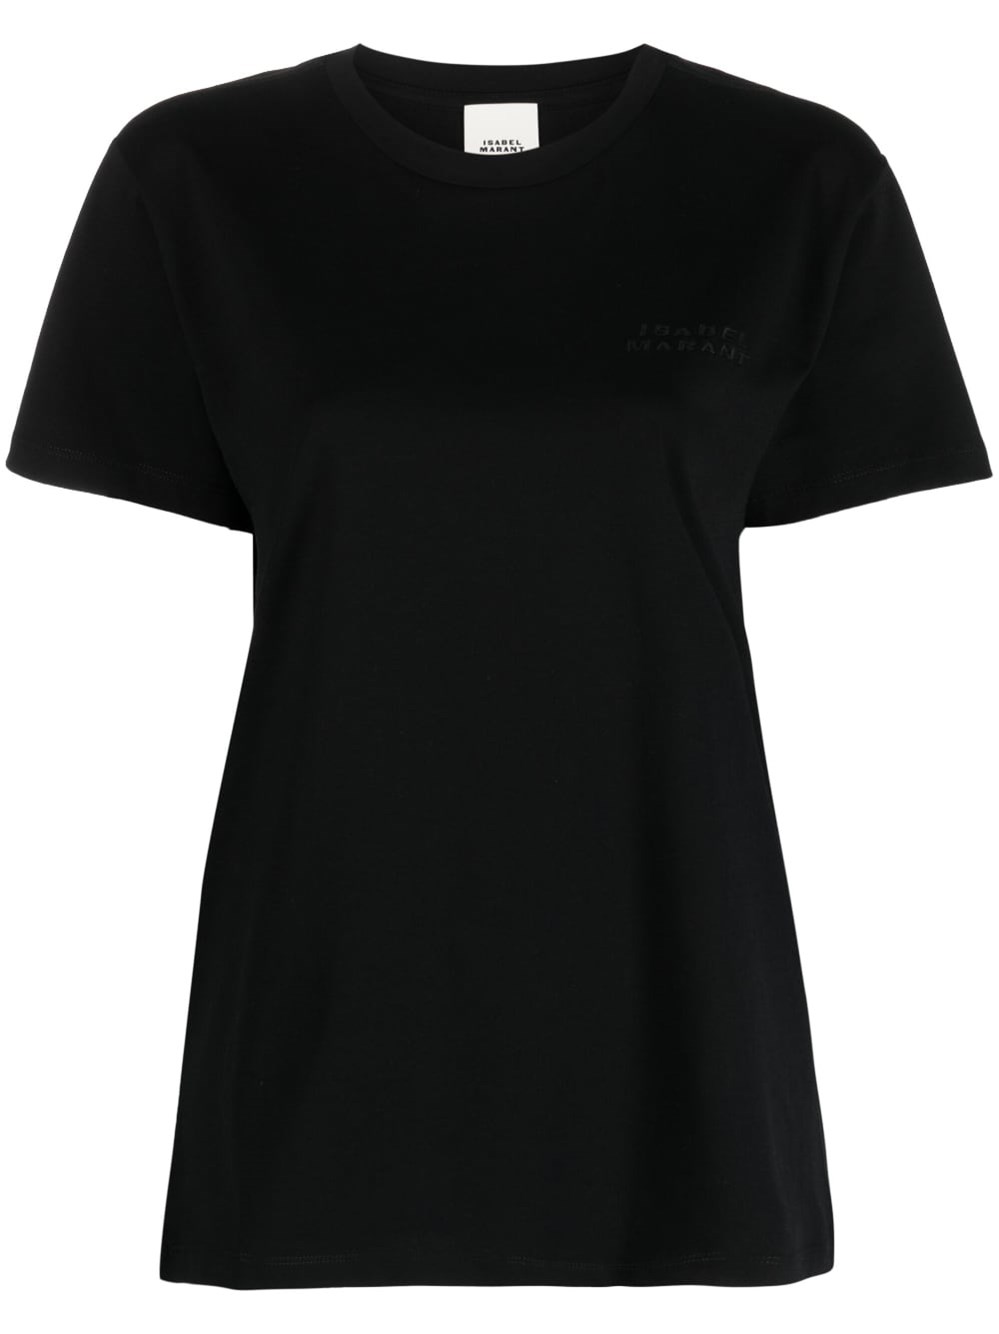 isabel marant LOGO T-SHIRT available on montiboutique.com - 54088